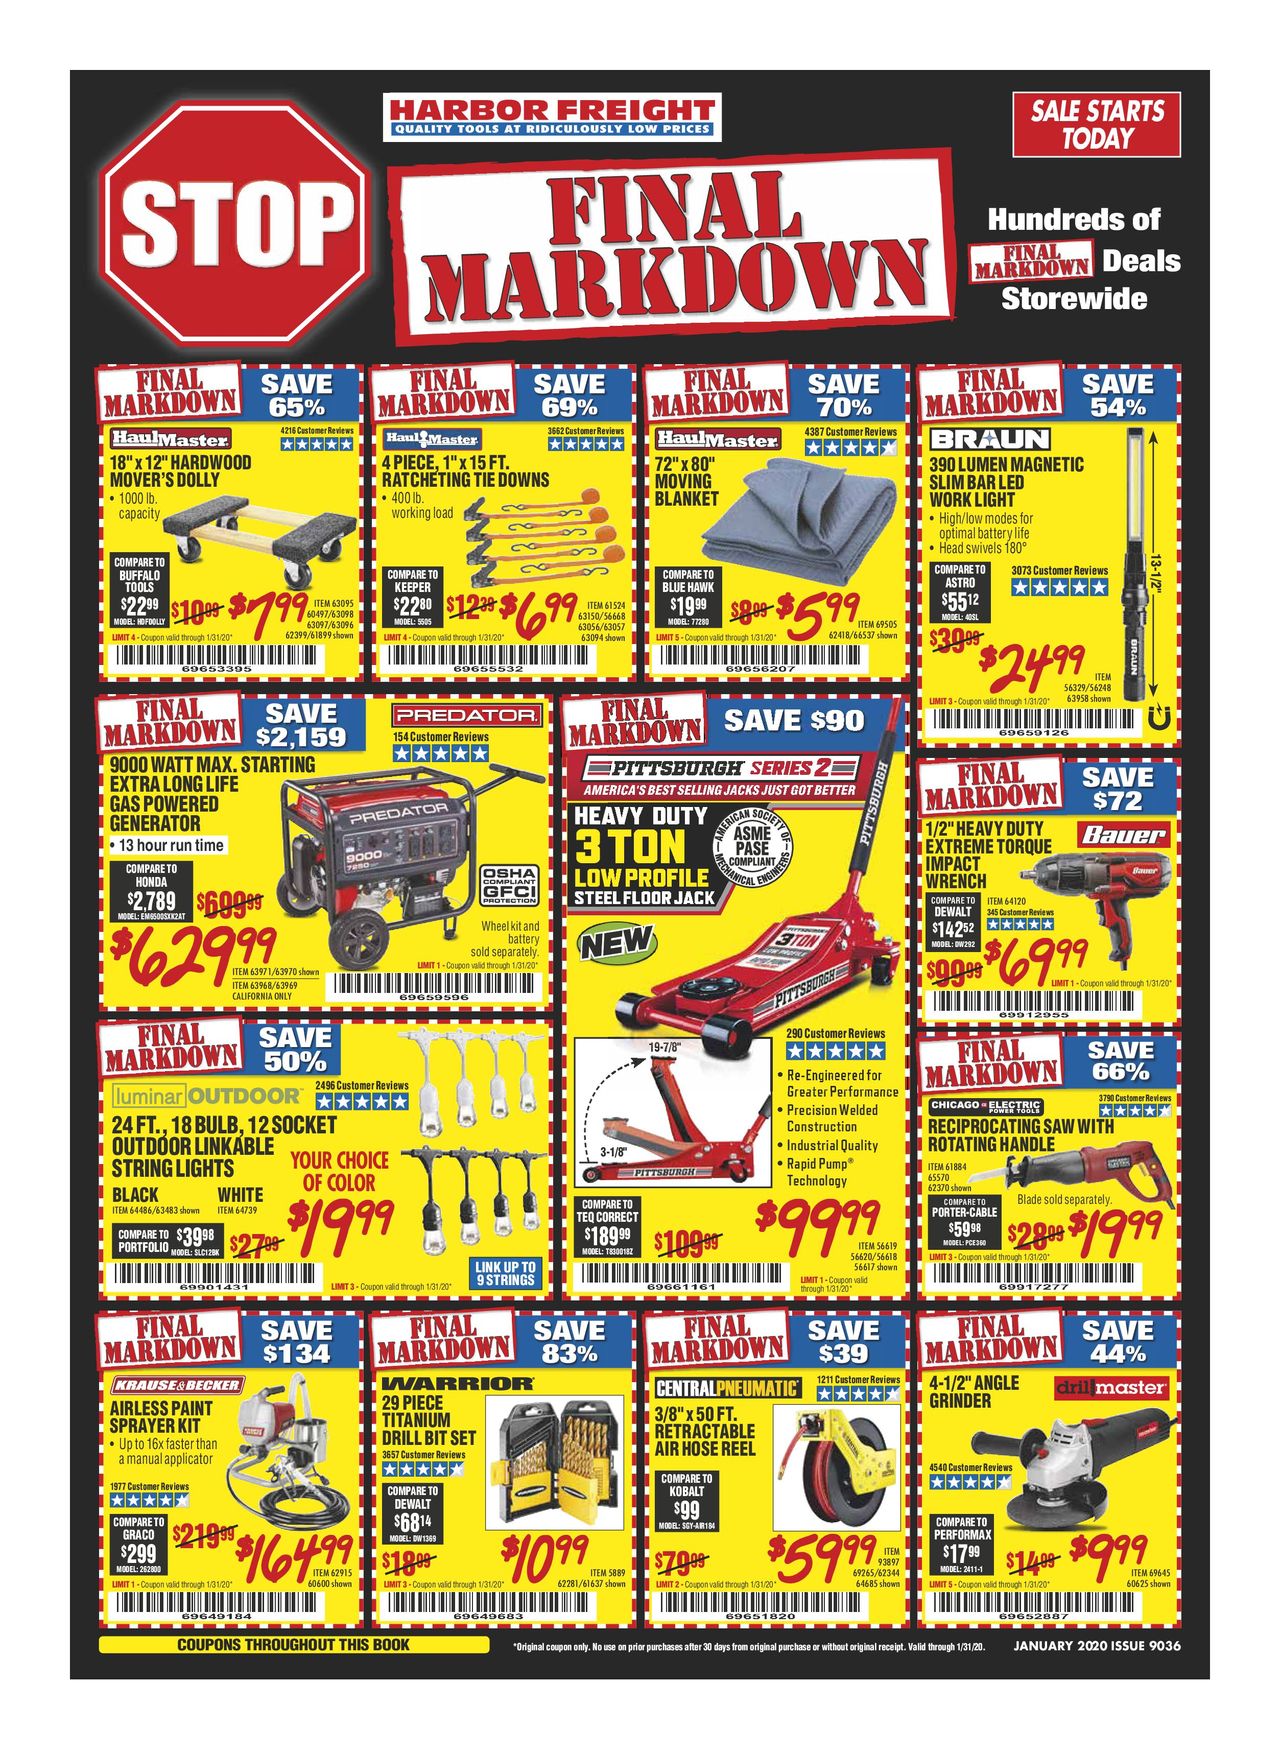 Harbor Freight Tools - Monthly Special - 01/01/20 | us ...